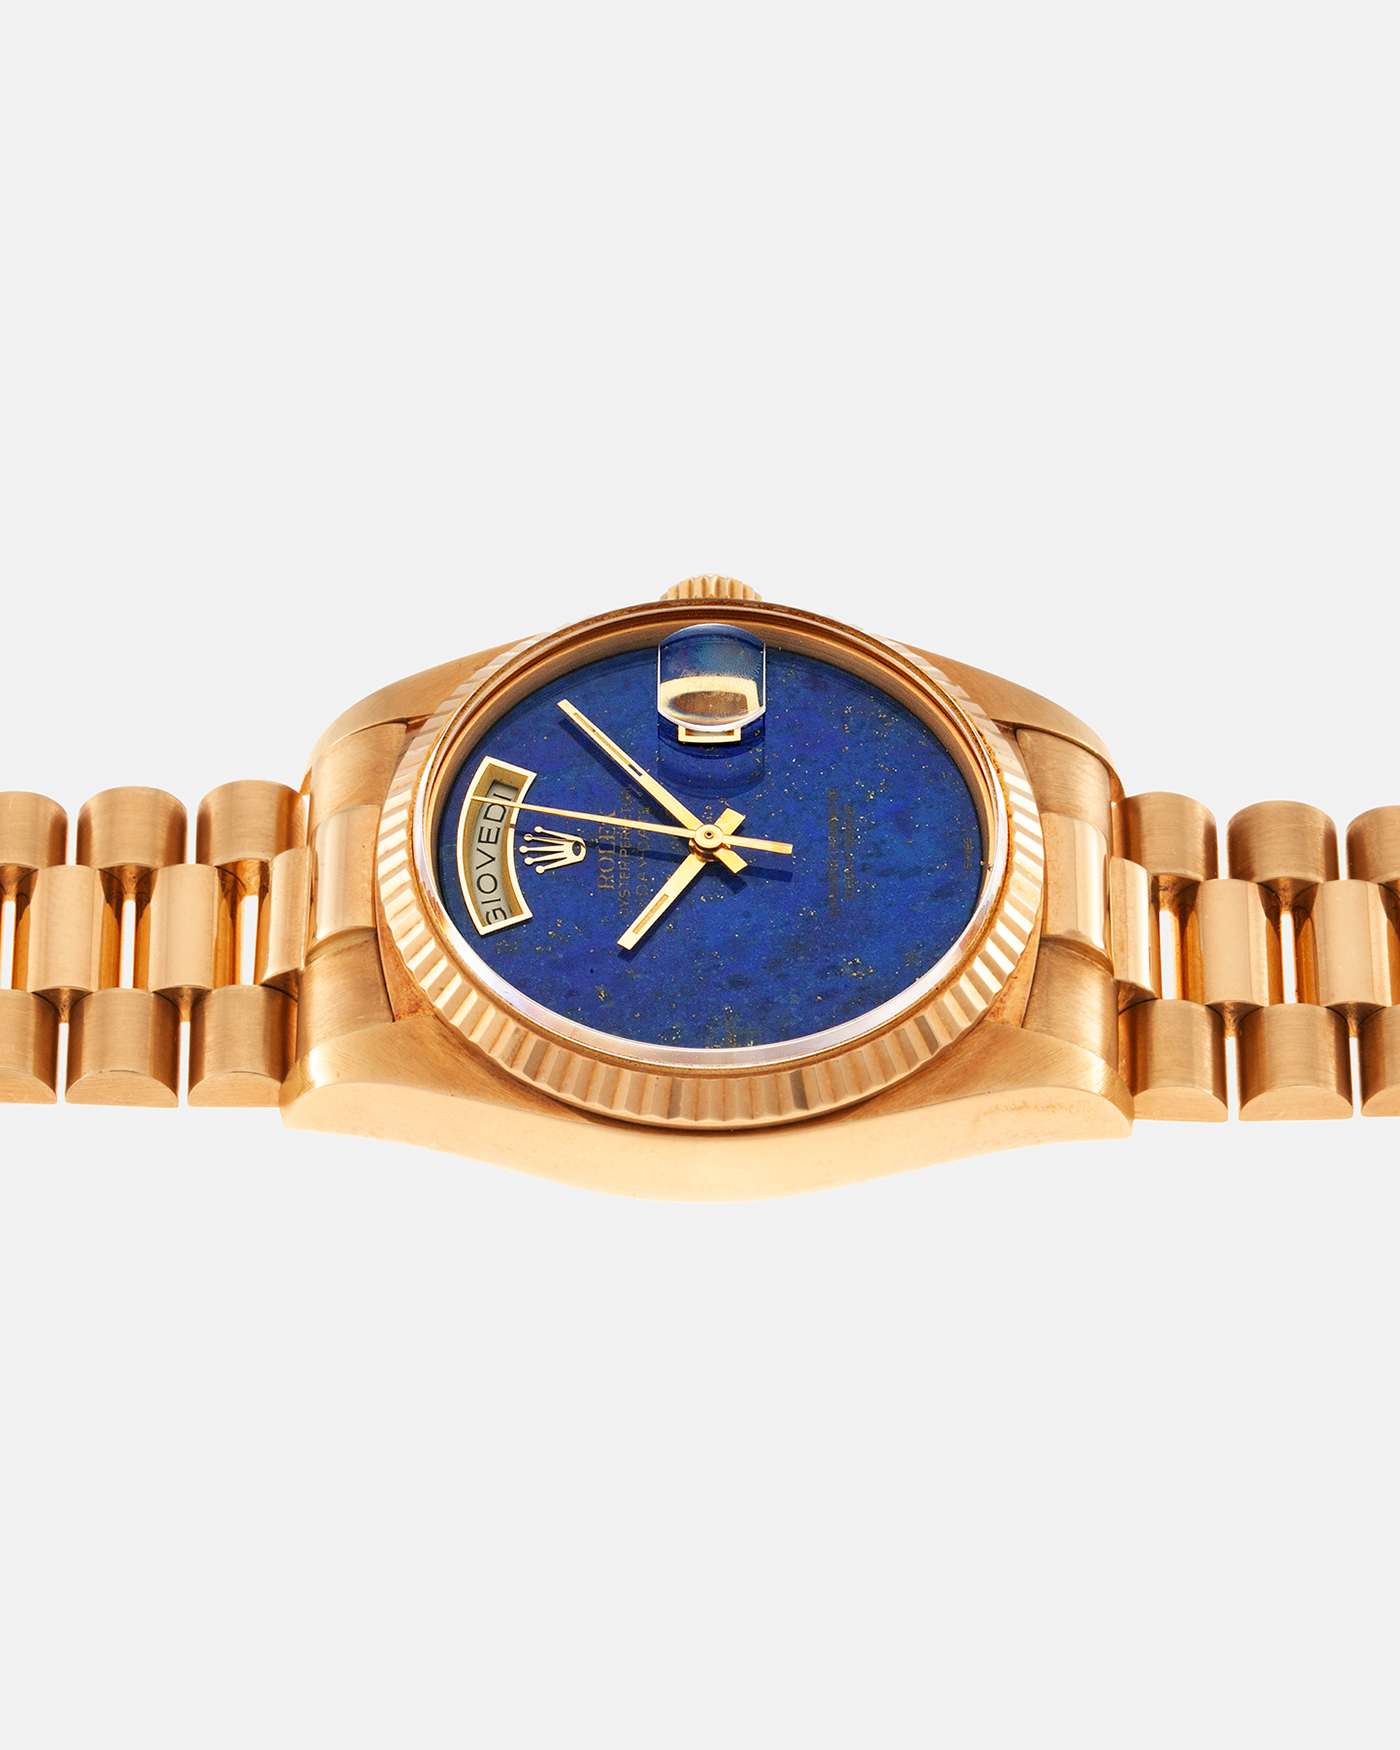 Rolex Day Date 18038 Lapis Lazuli President Watch | S.Song Vintage ...